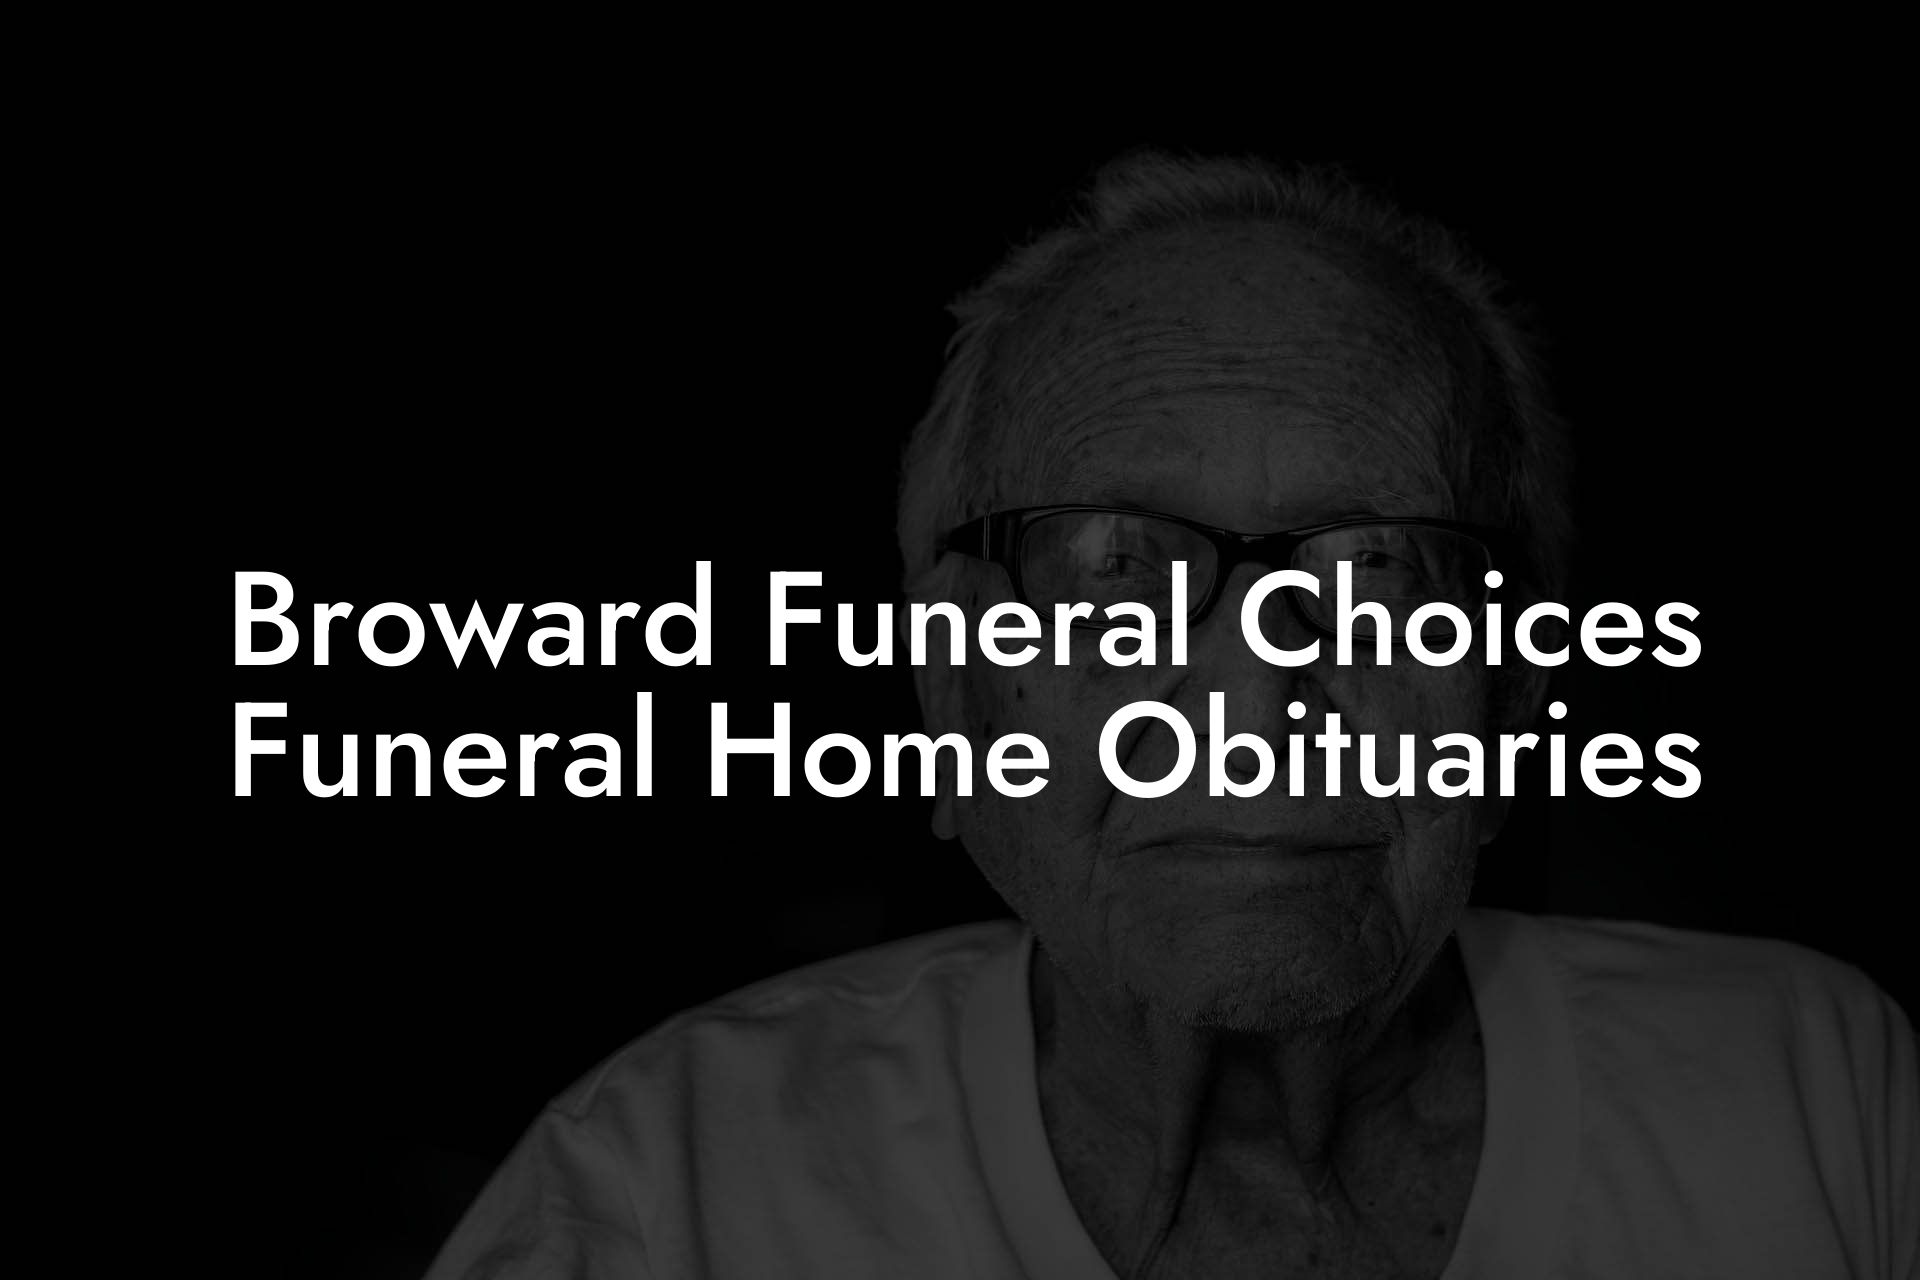 Broward Funeral Choices Funeral Home Obituaries